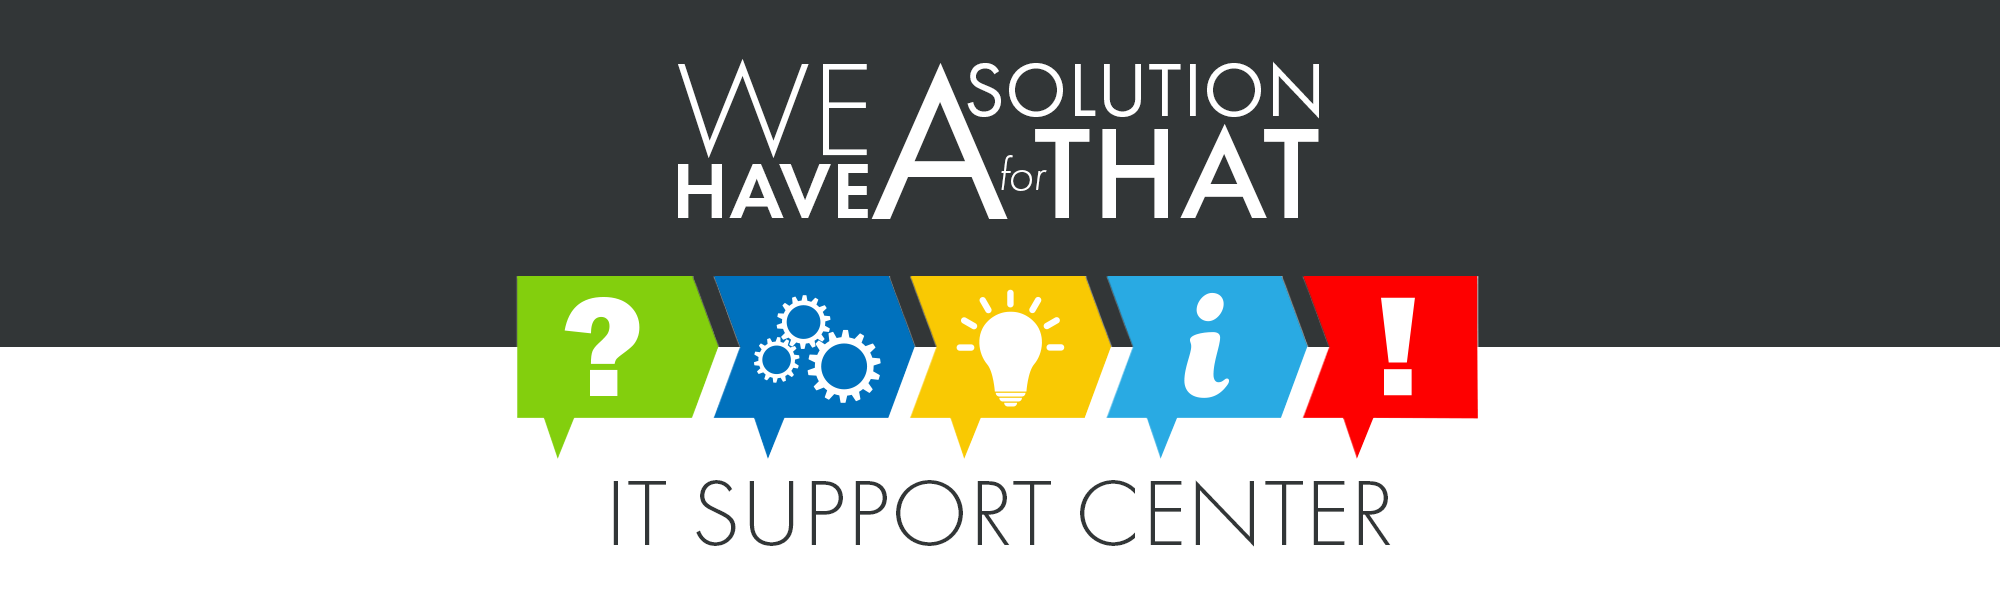 IT Support Center. VCU Technology Services.